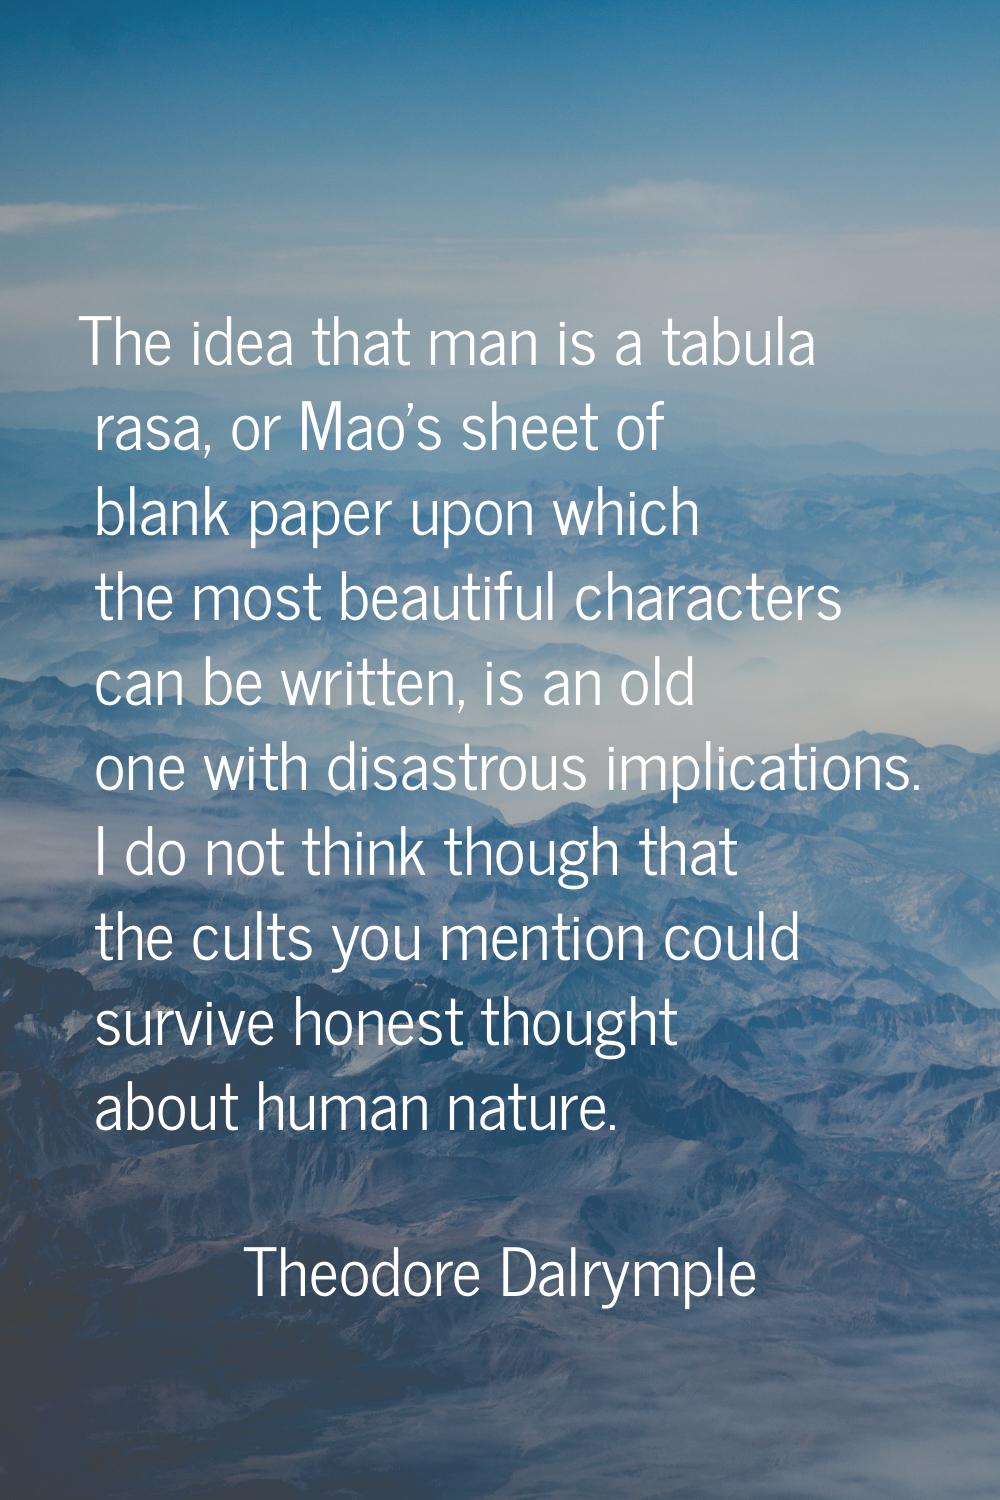 The idea that man is a tabula rasa, or Mao's sheet of blank paper upon which the most beautiful cha